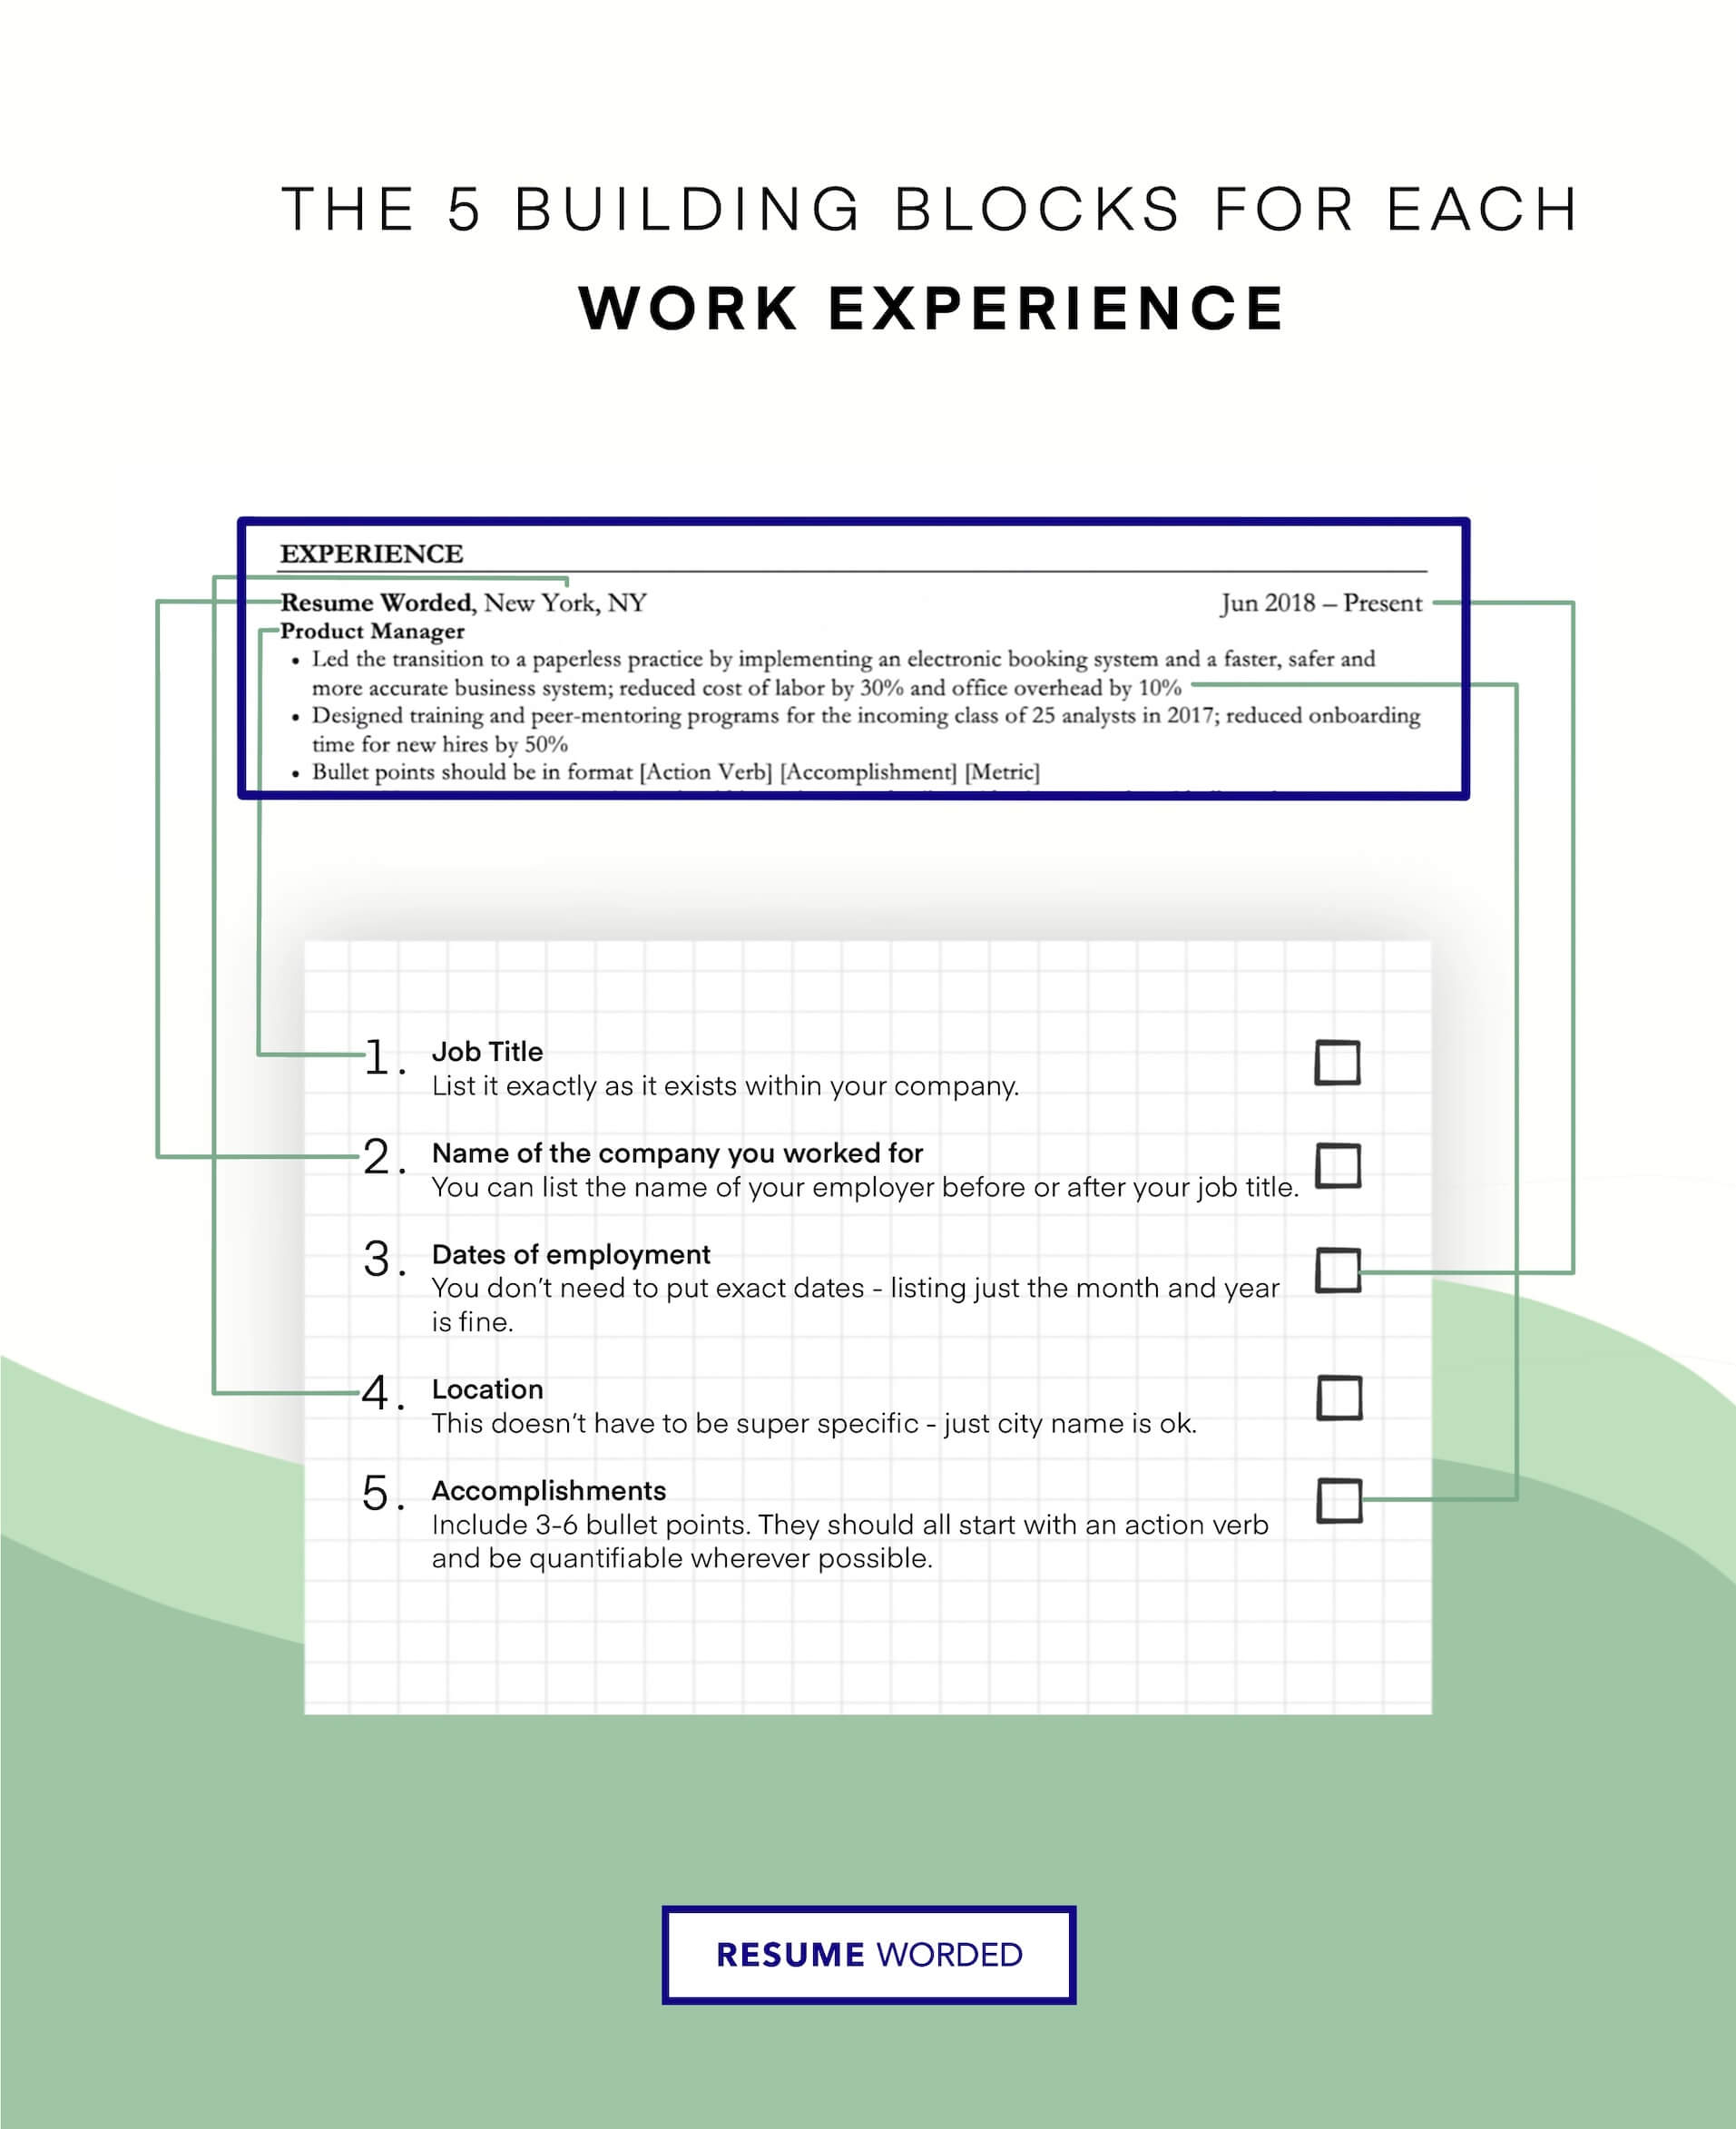 Include relevant extra-curriculars to supplement work experience - Financial Aid Advisor Resume